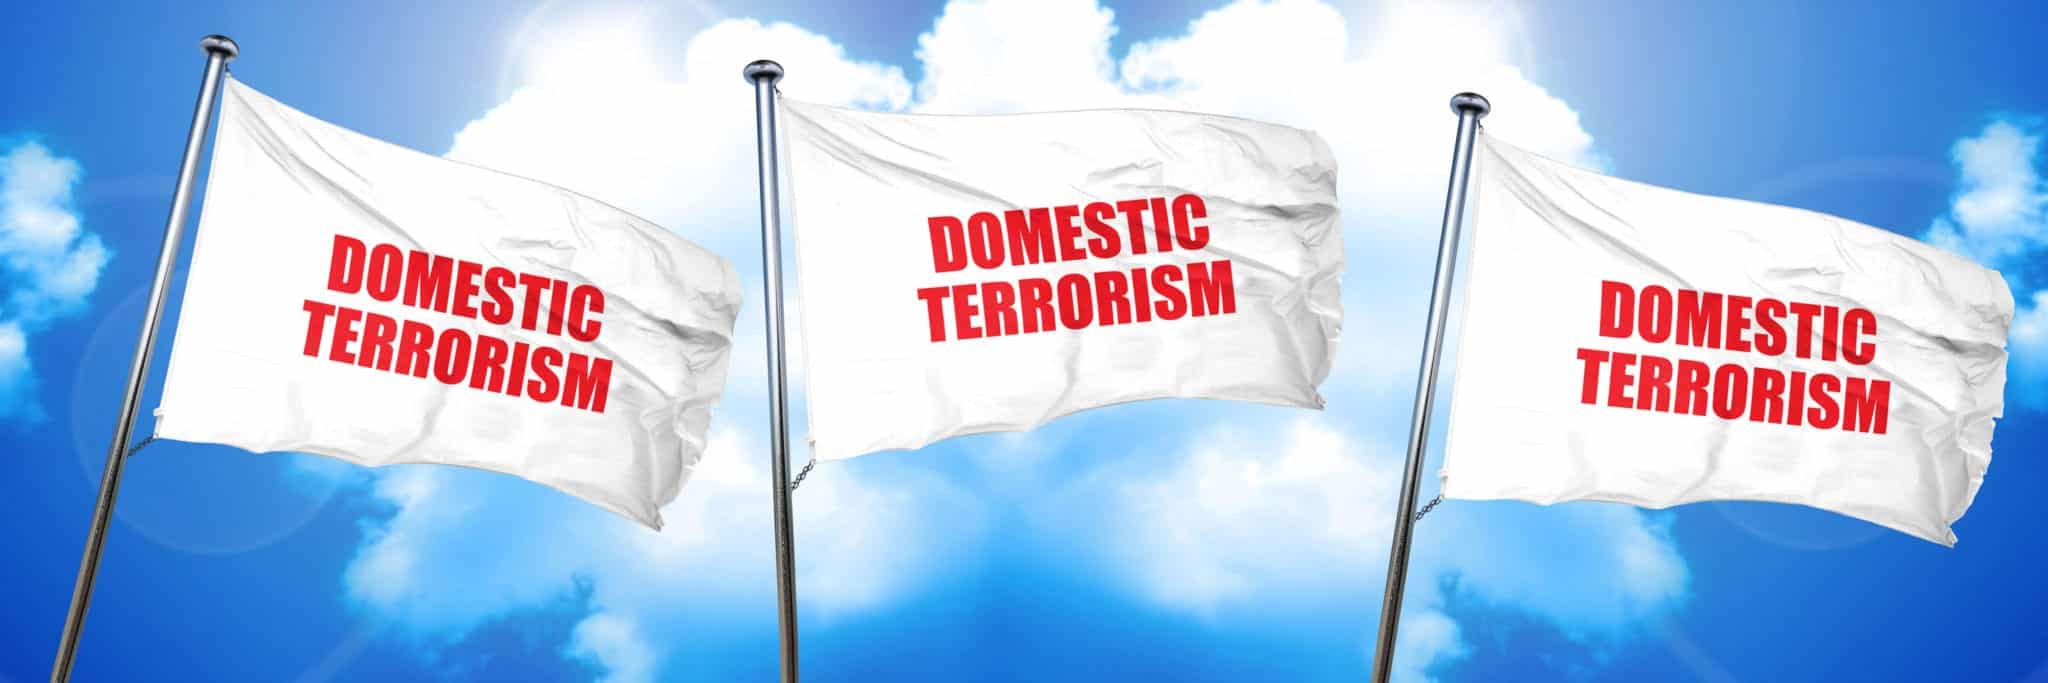 Domestic Terrorism Is Not a Federal Charge... Yet